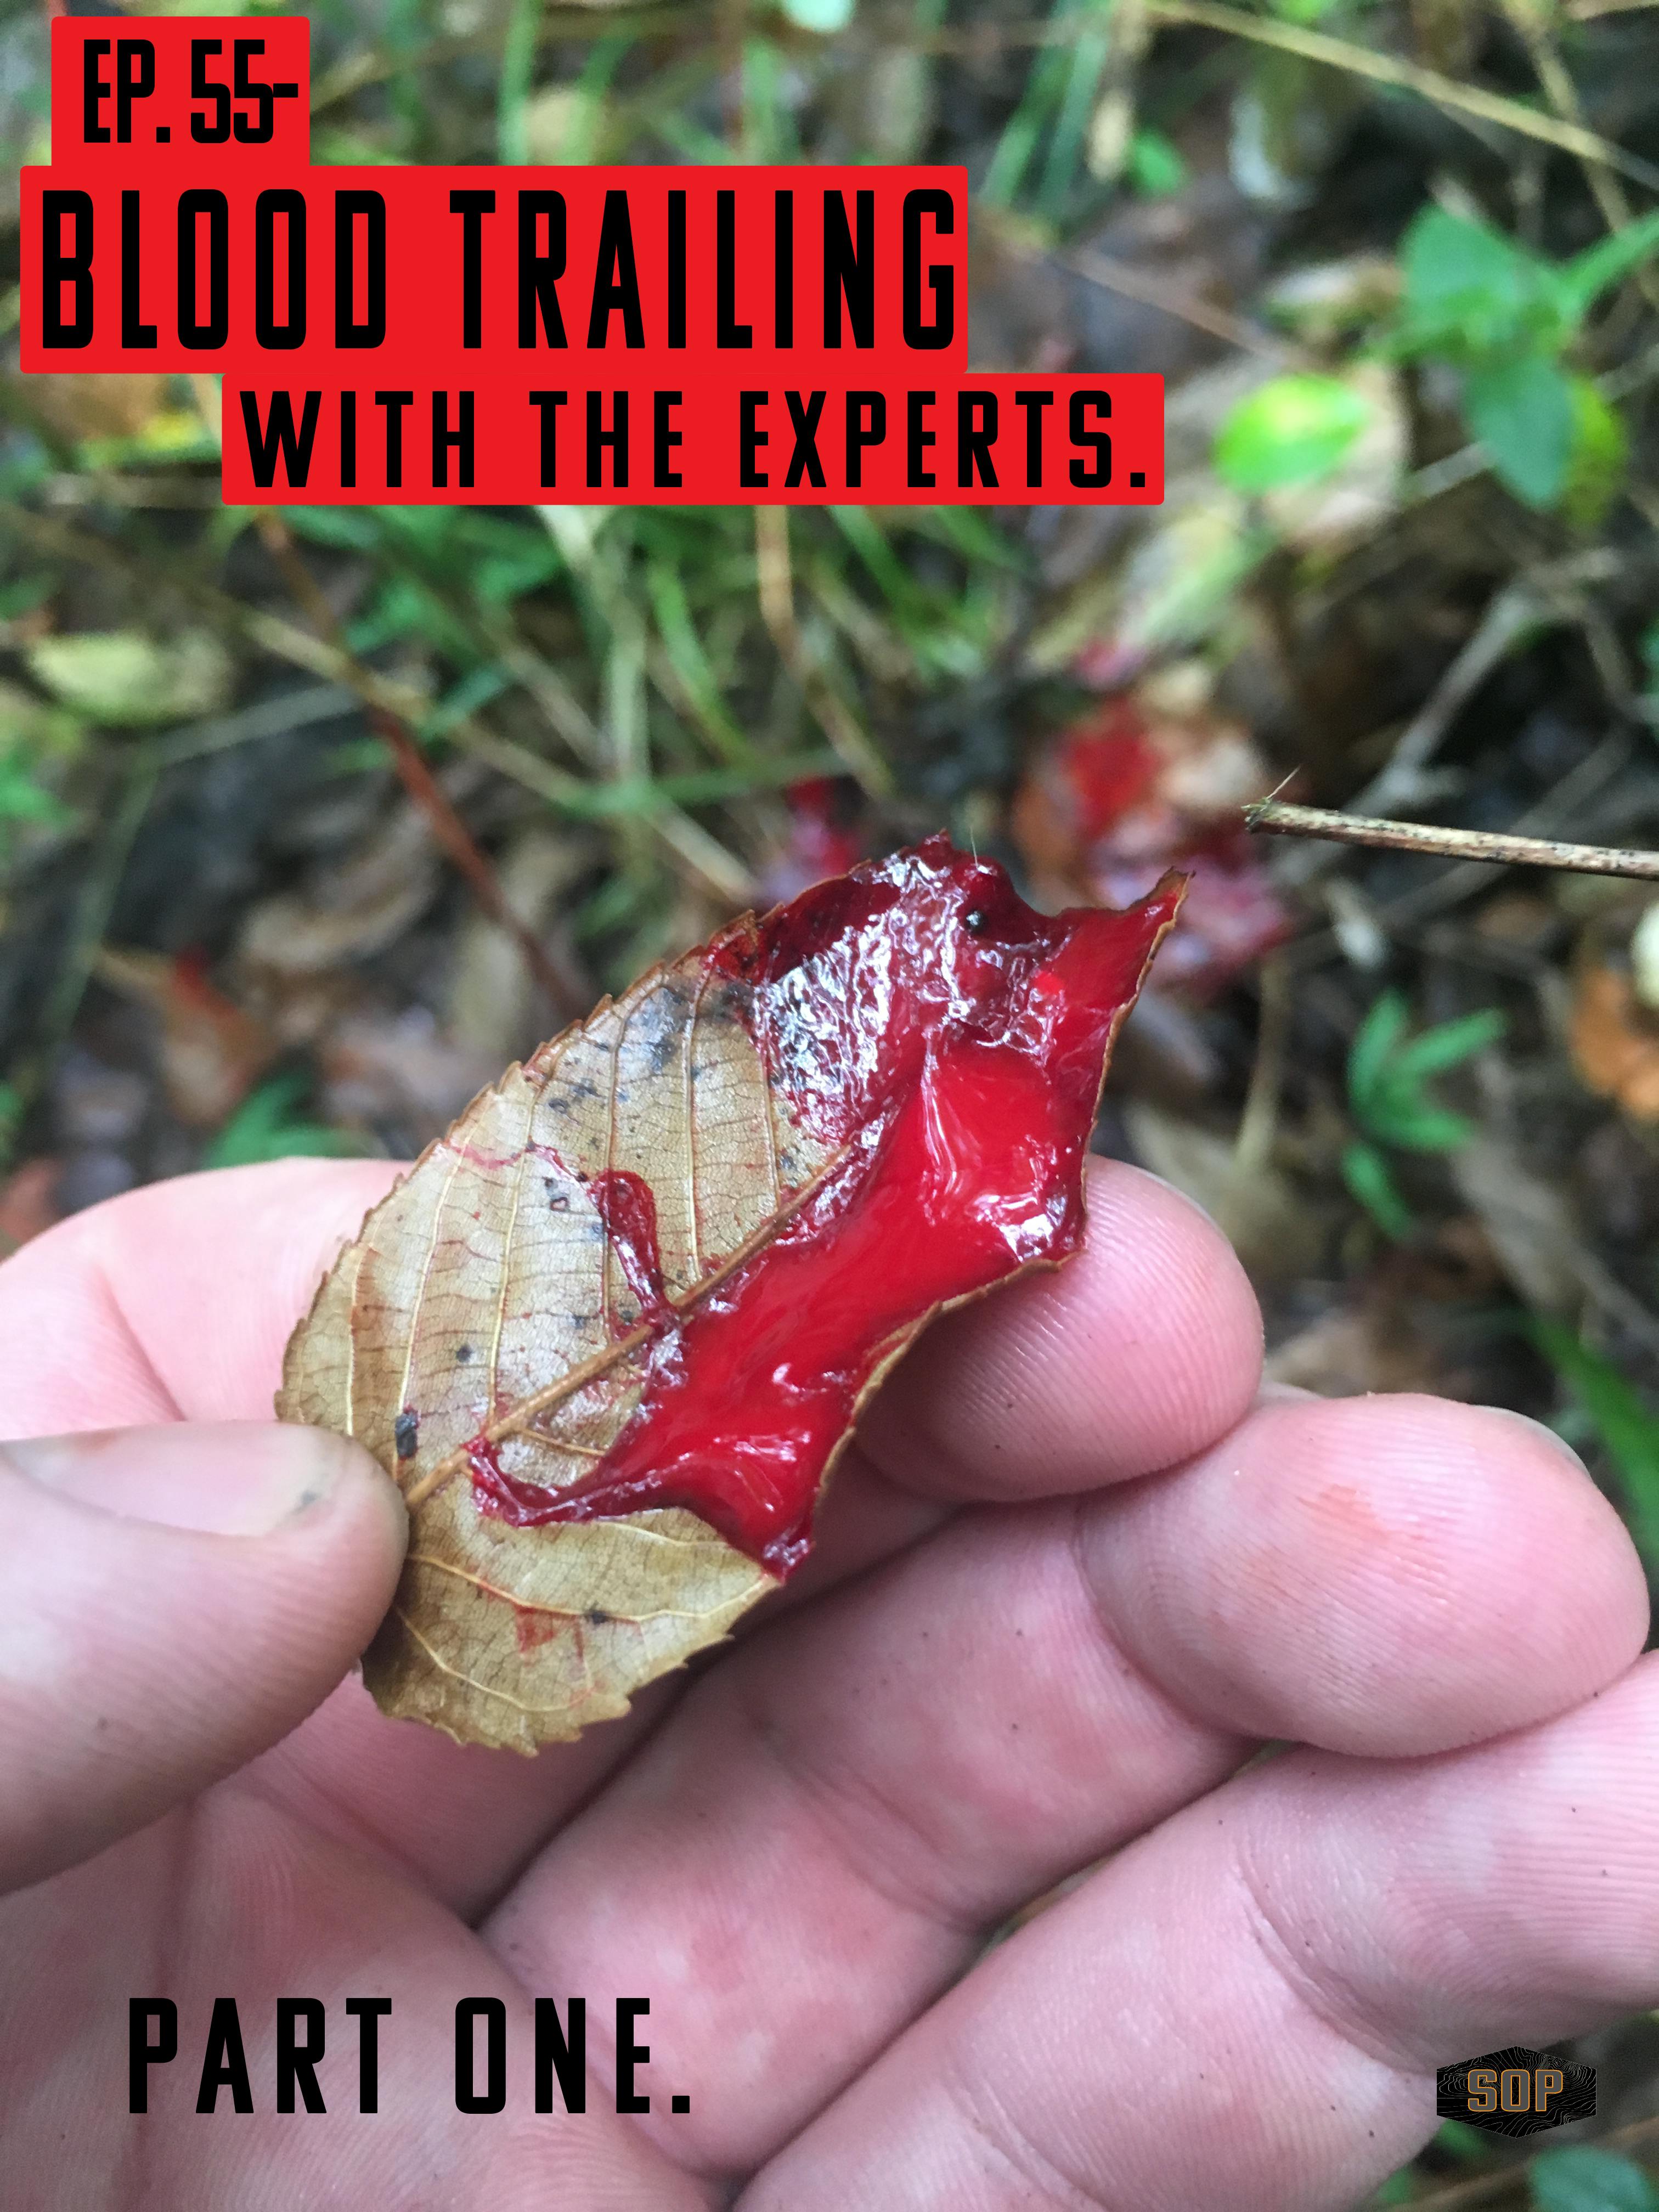 EP. 55- Blood Trailing with the Experts, part 1